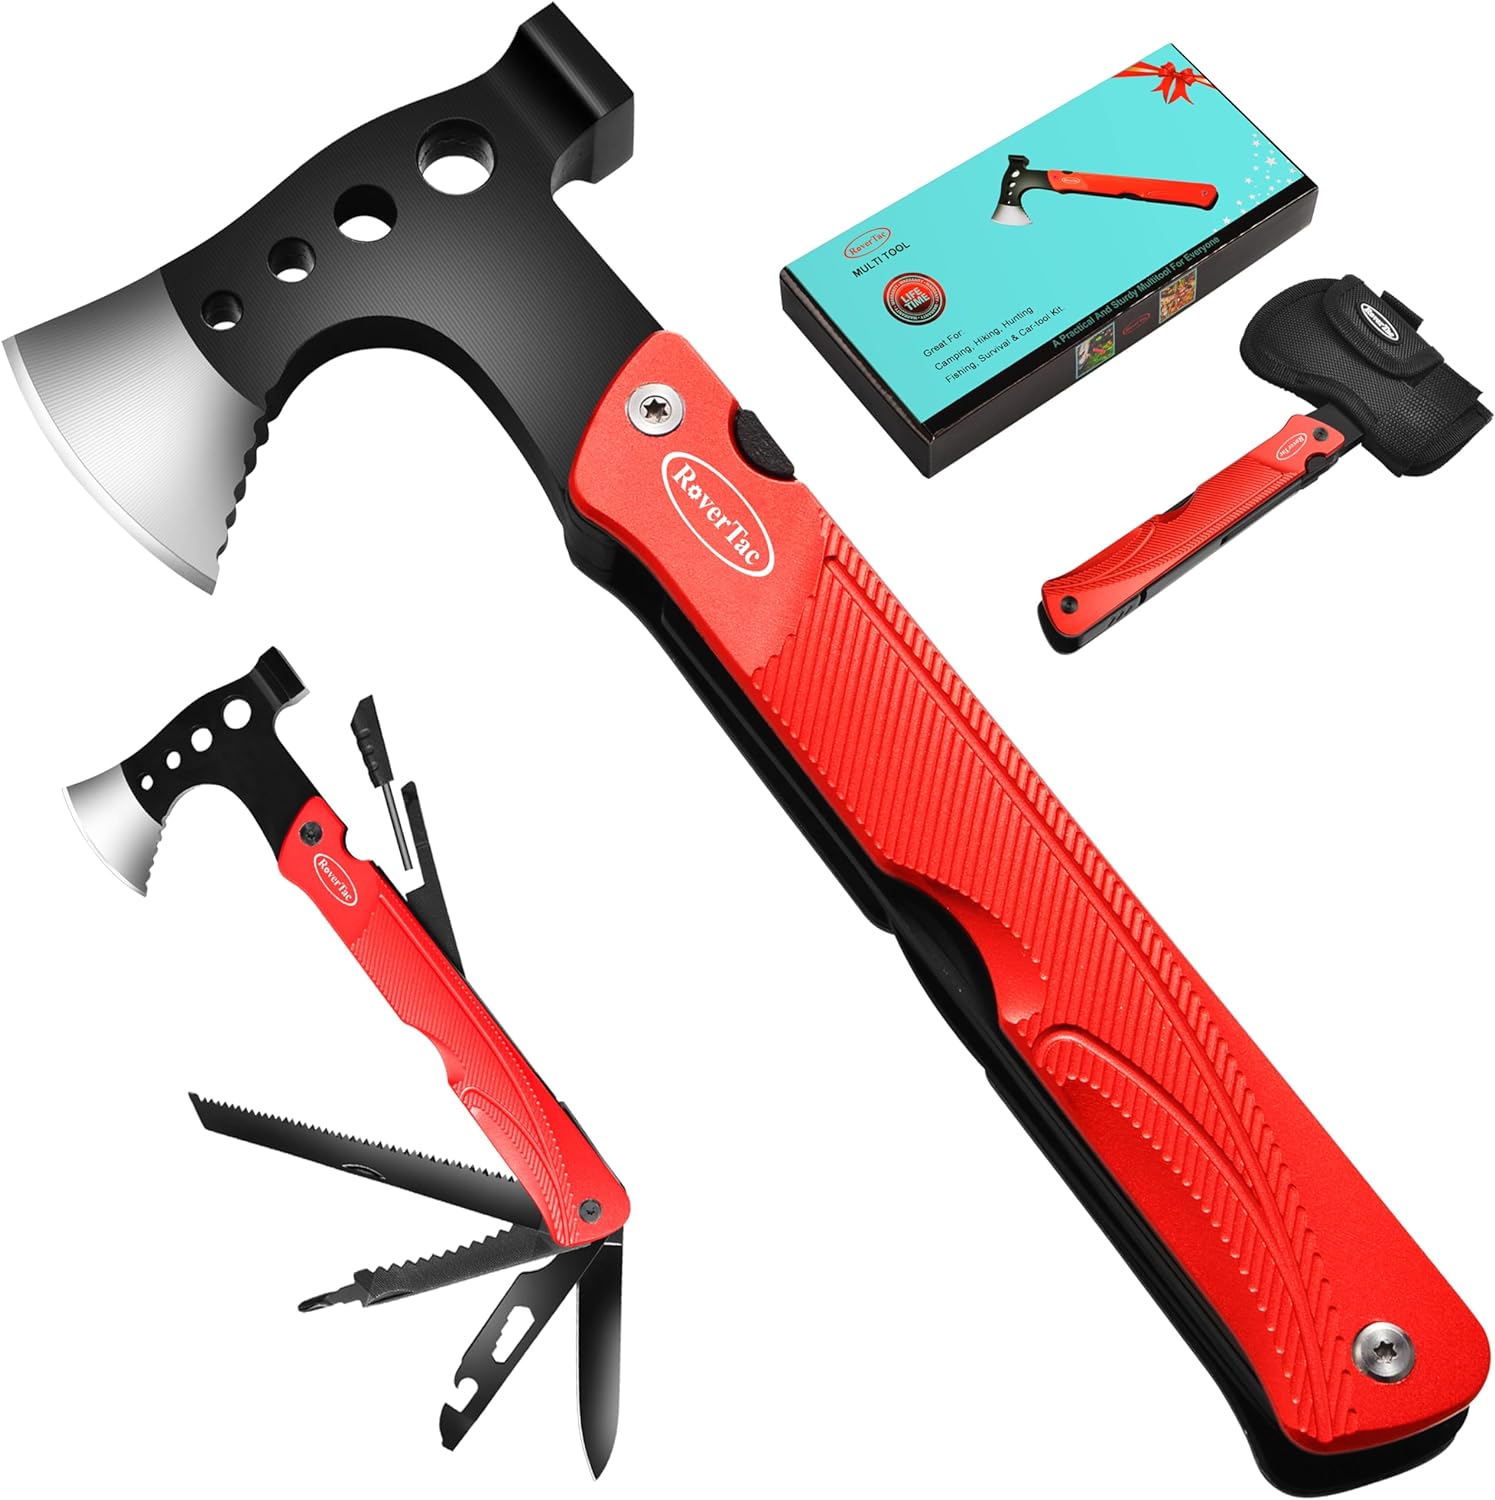 RoverTac Camping Hatchet Multitool Axe Survival Gear Gifts for Men Dad –  RoverTac Tools & Knives